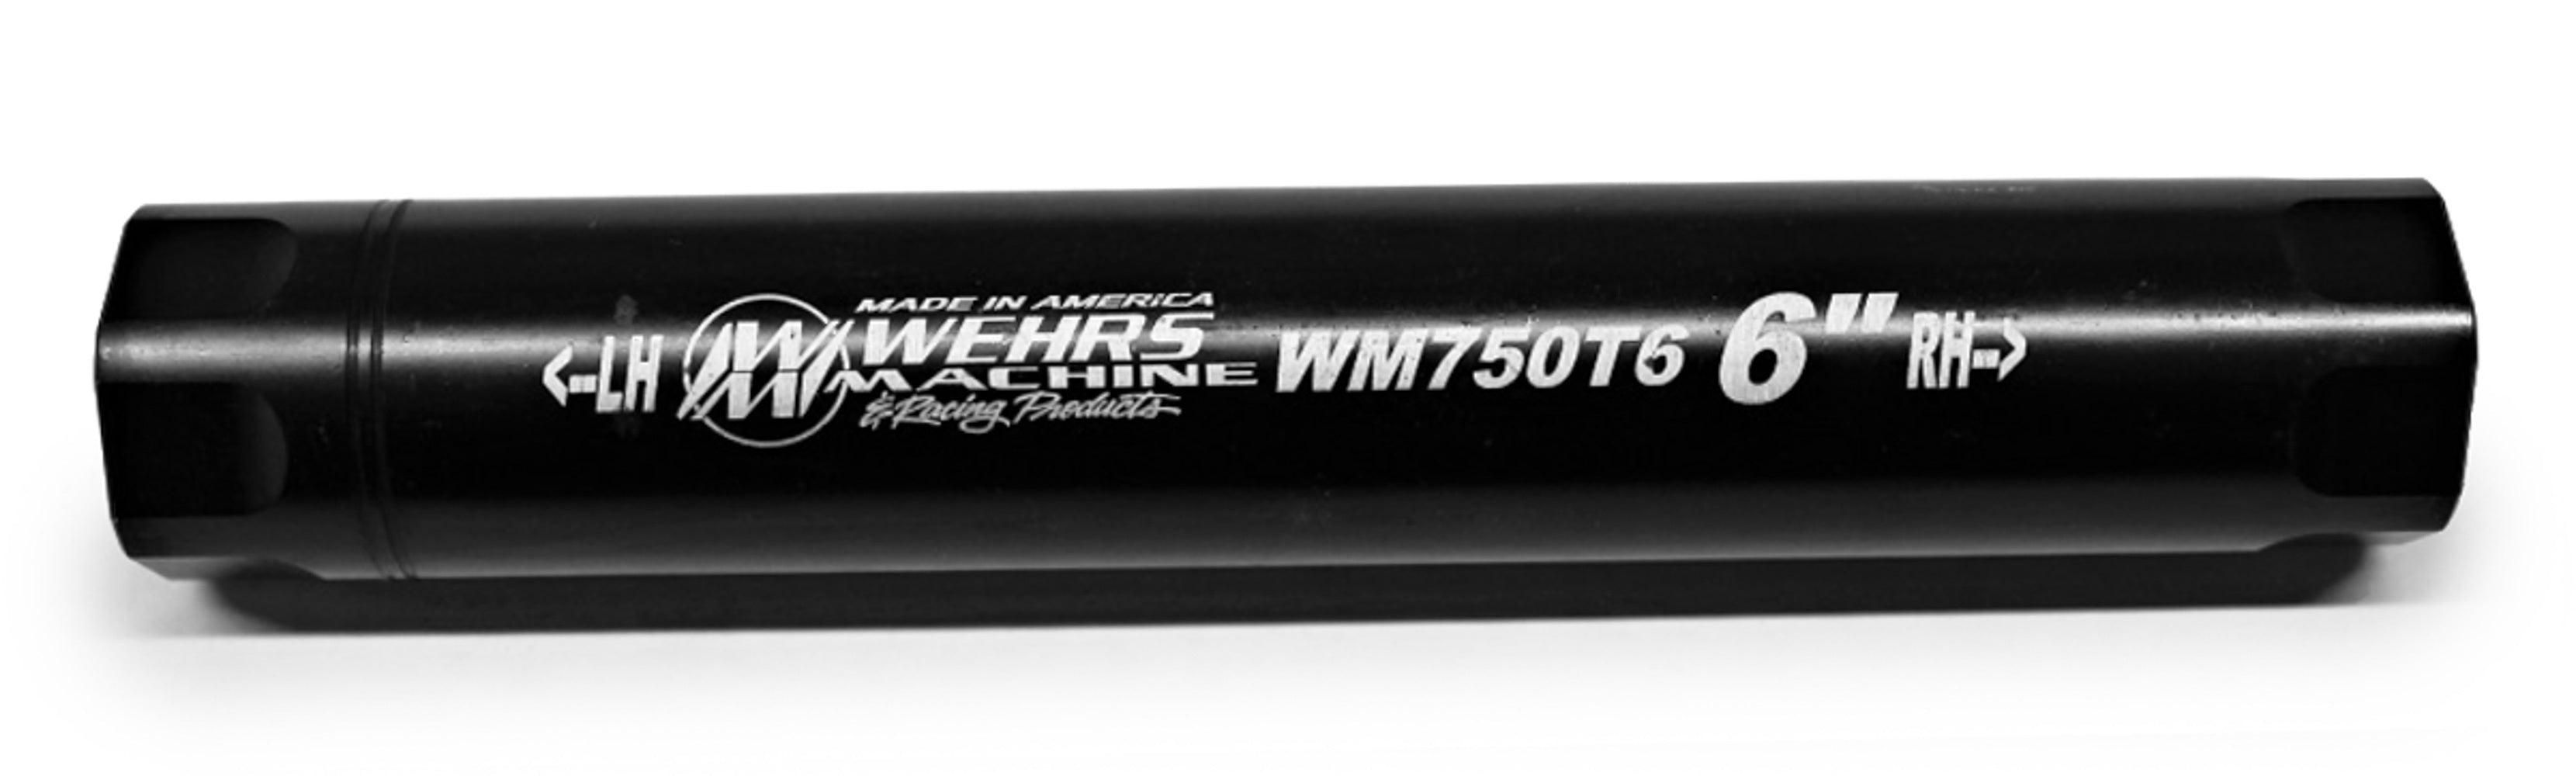 Suspension Tube 6in x 3/4in-20 THD - Burlile Performance Products